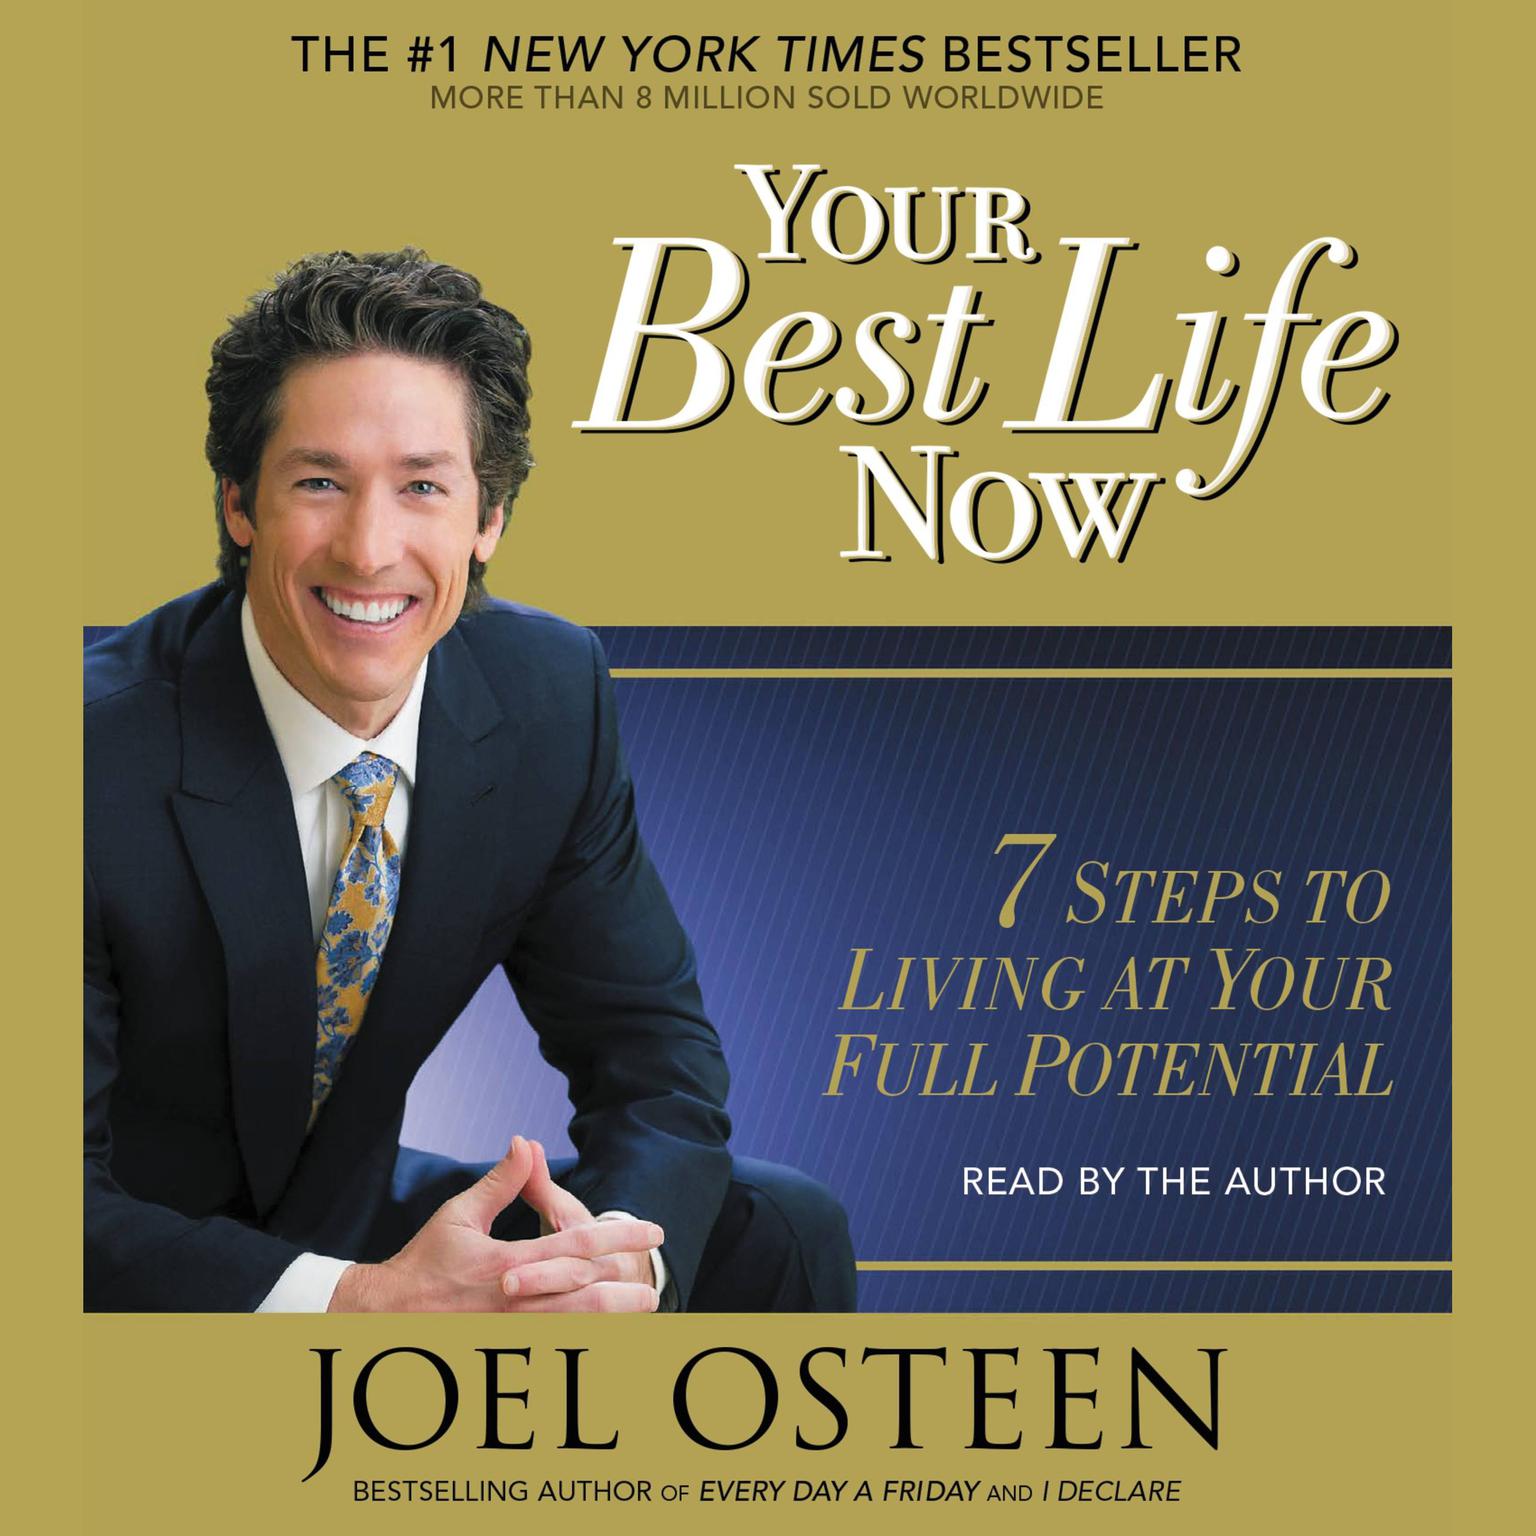 Your Best Life Now (Abridged): 7 Steps to Living at Your Full Potential Audiobook, by Joel Osteen